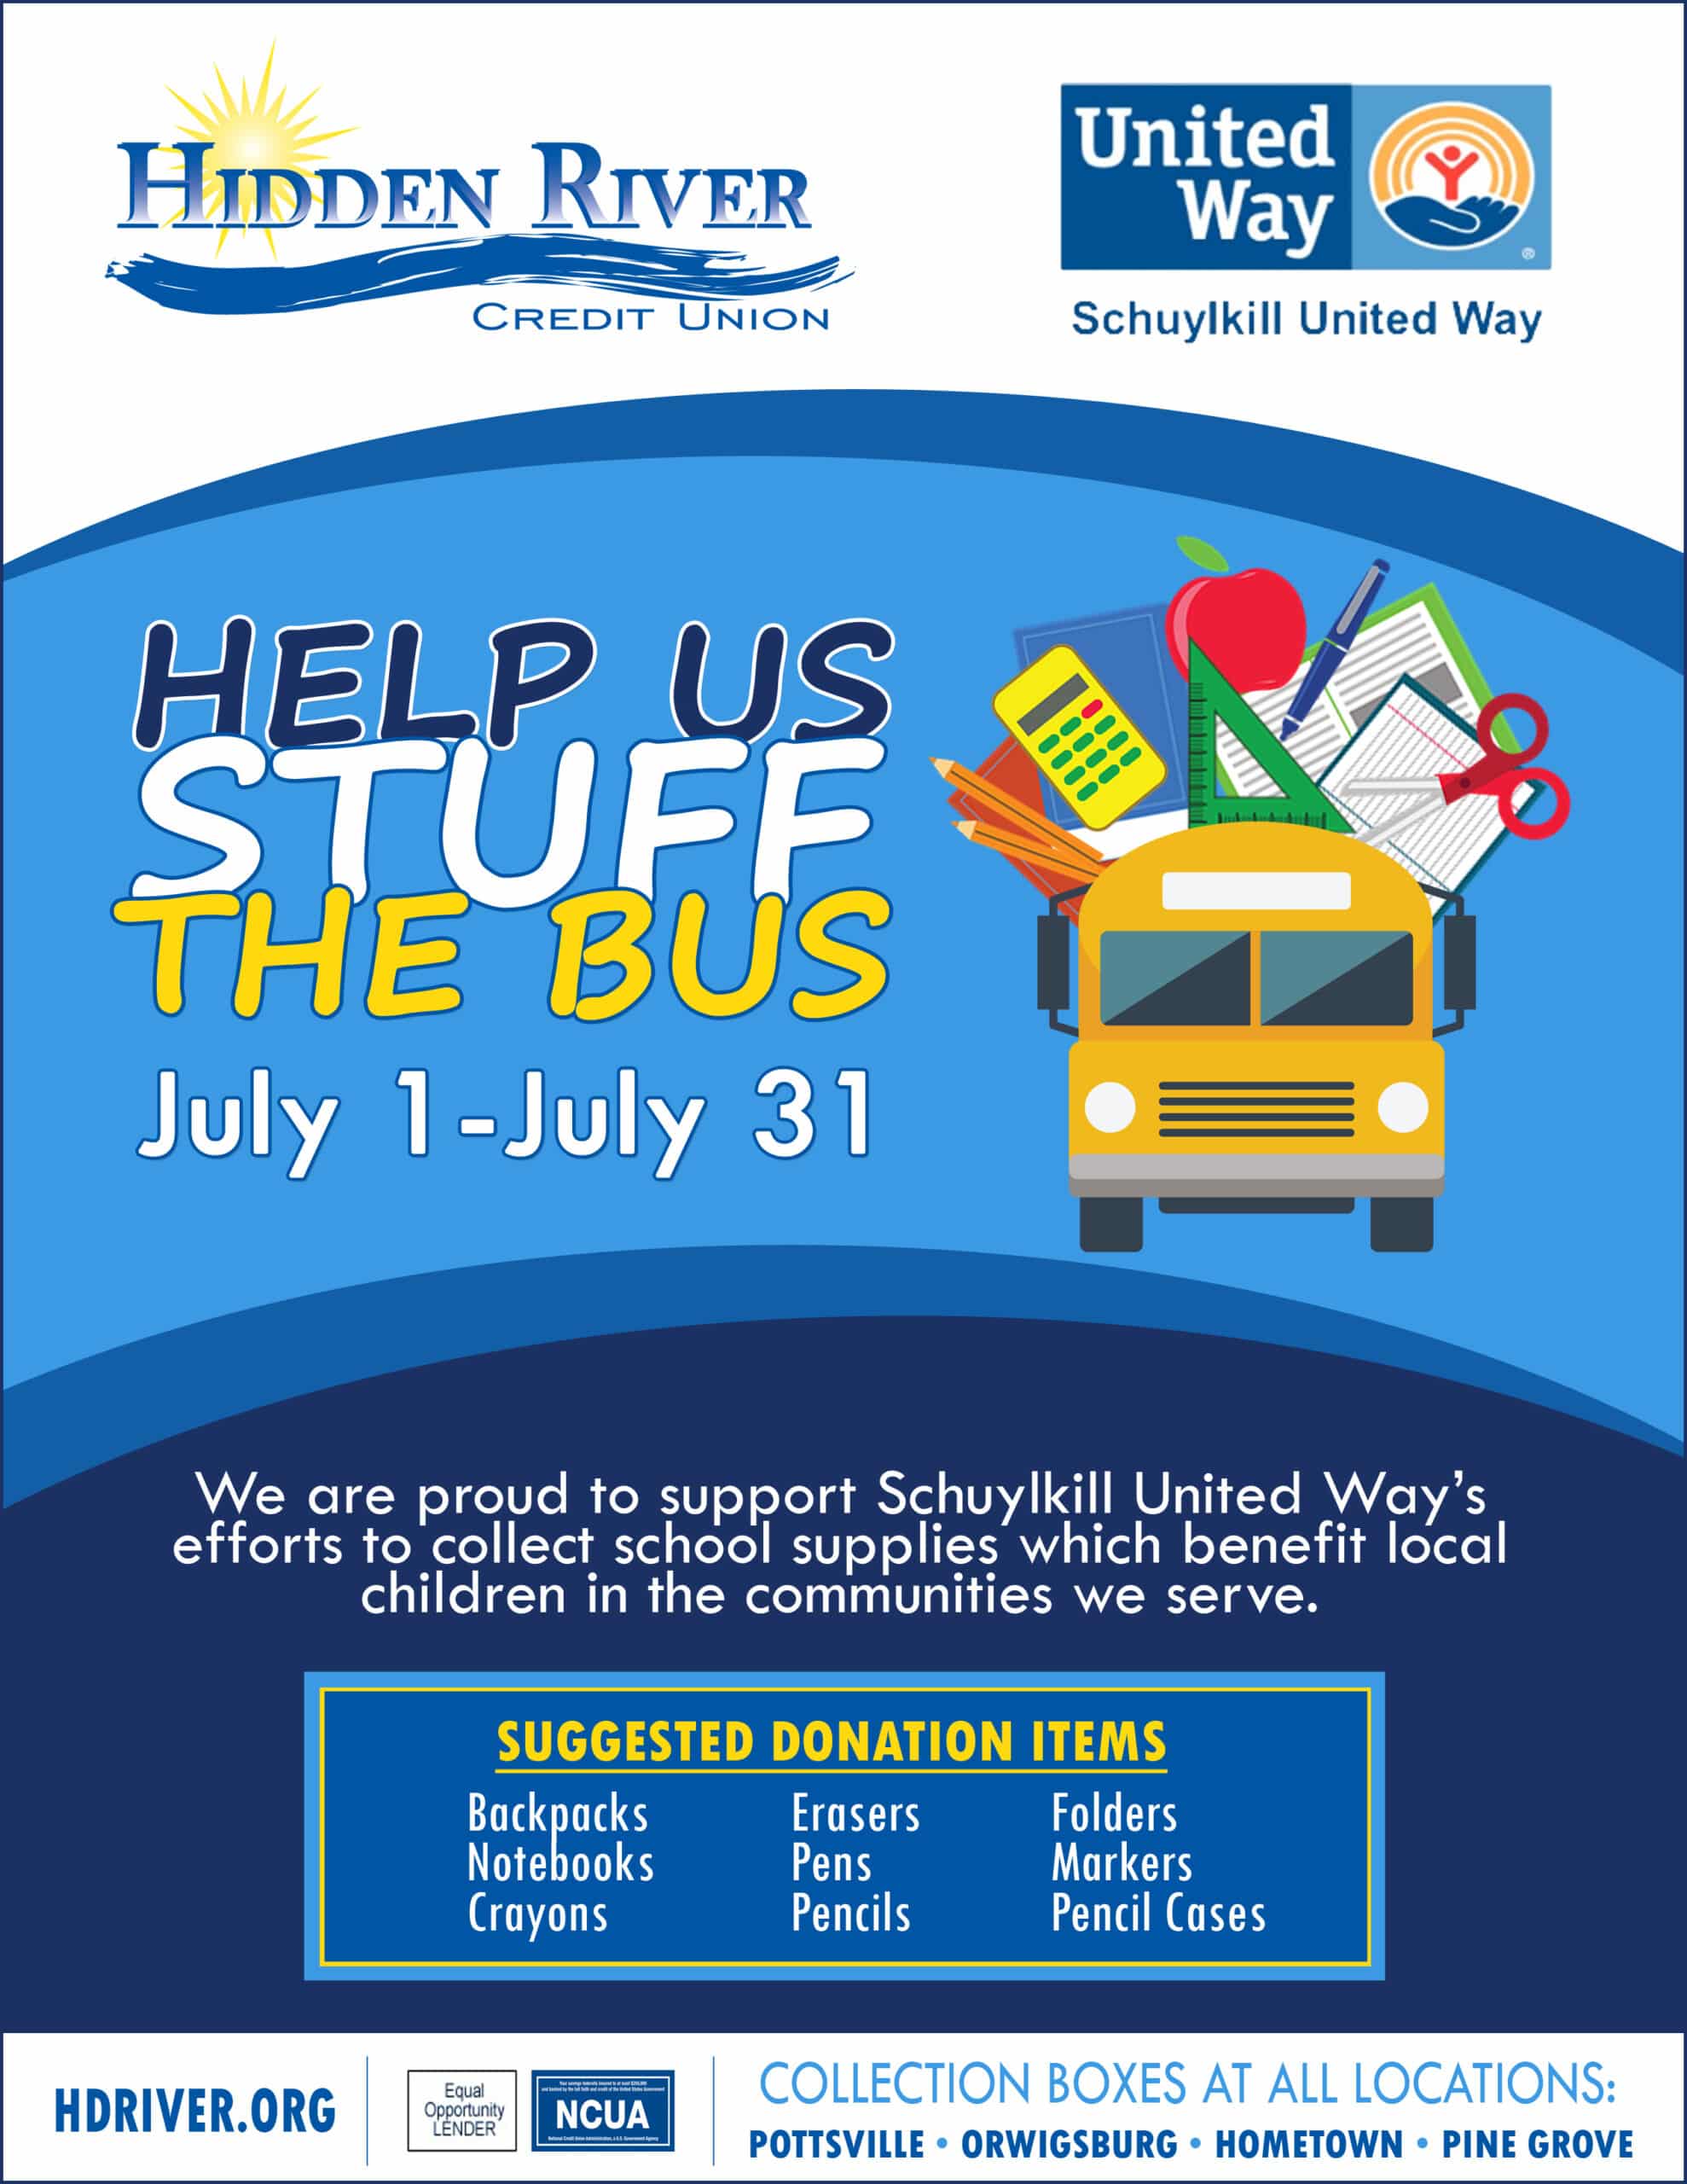 Flyer of bus filled with school supplies and request to help stuff the bus